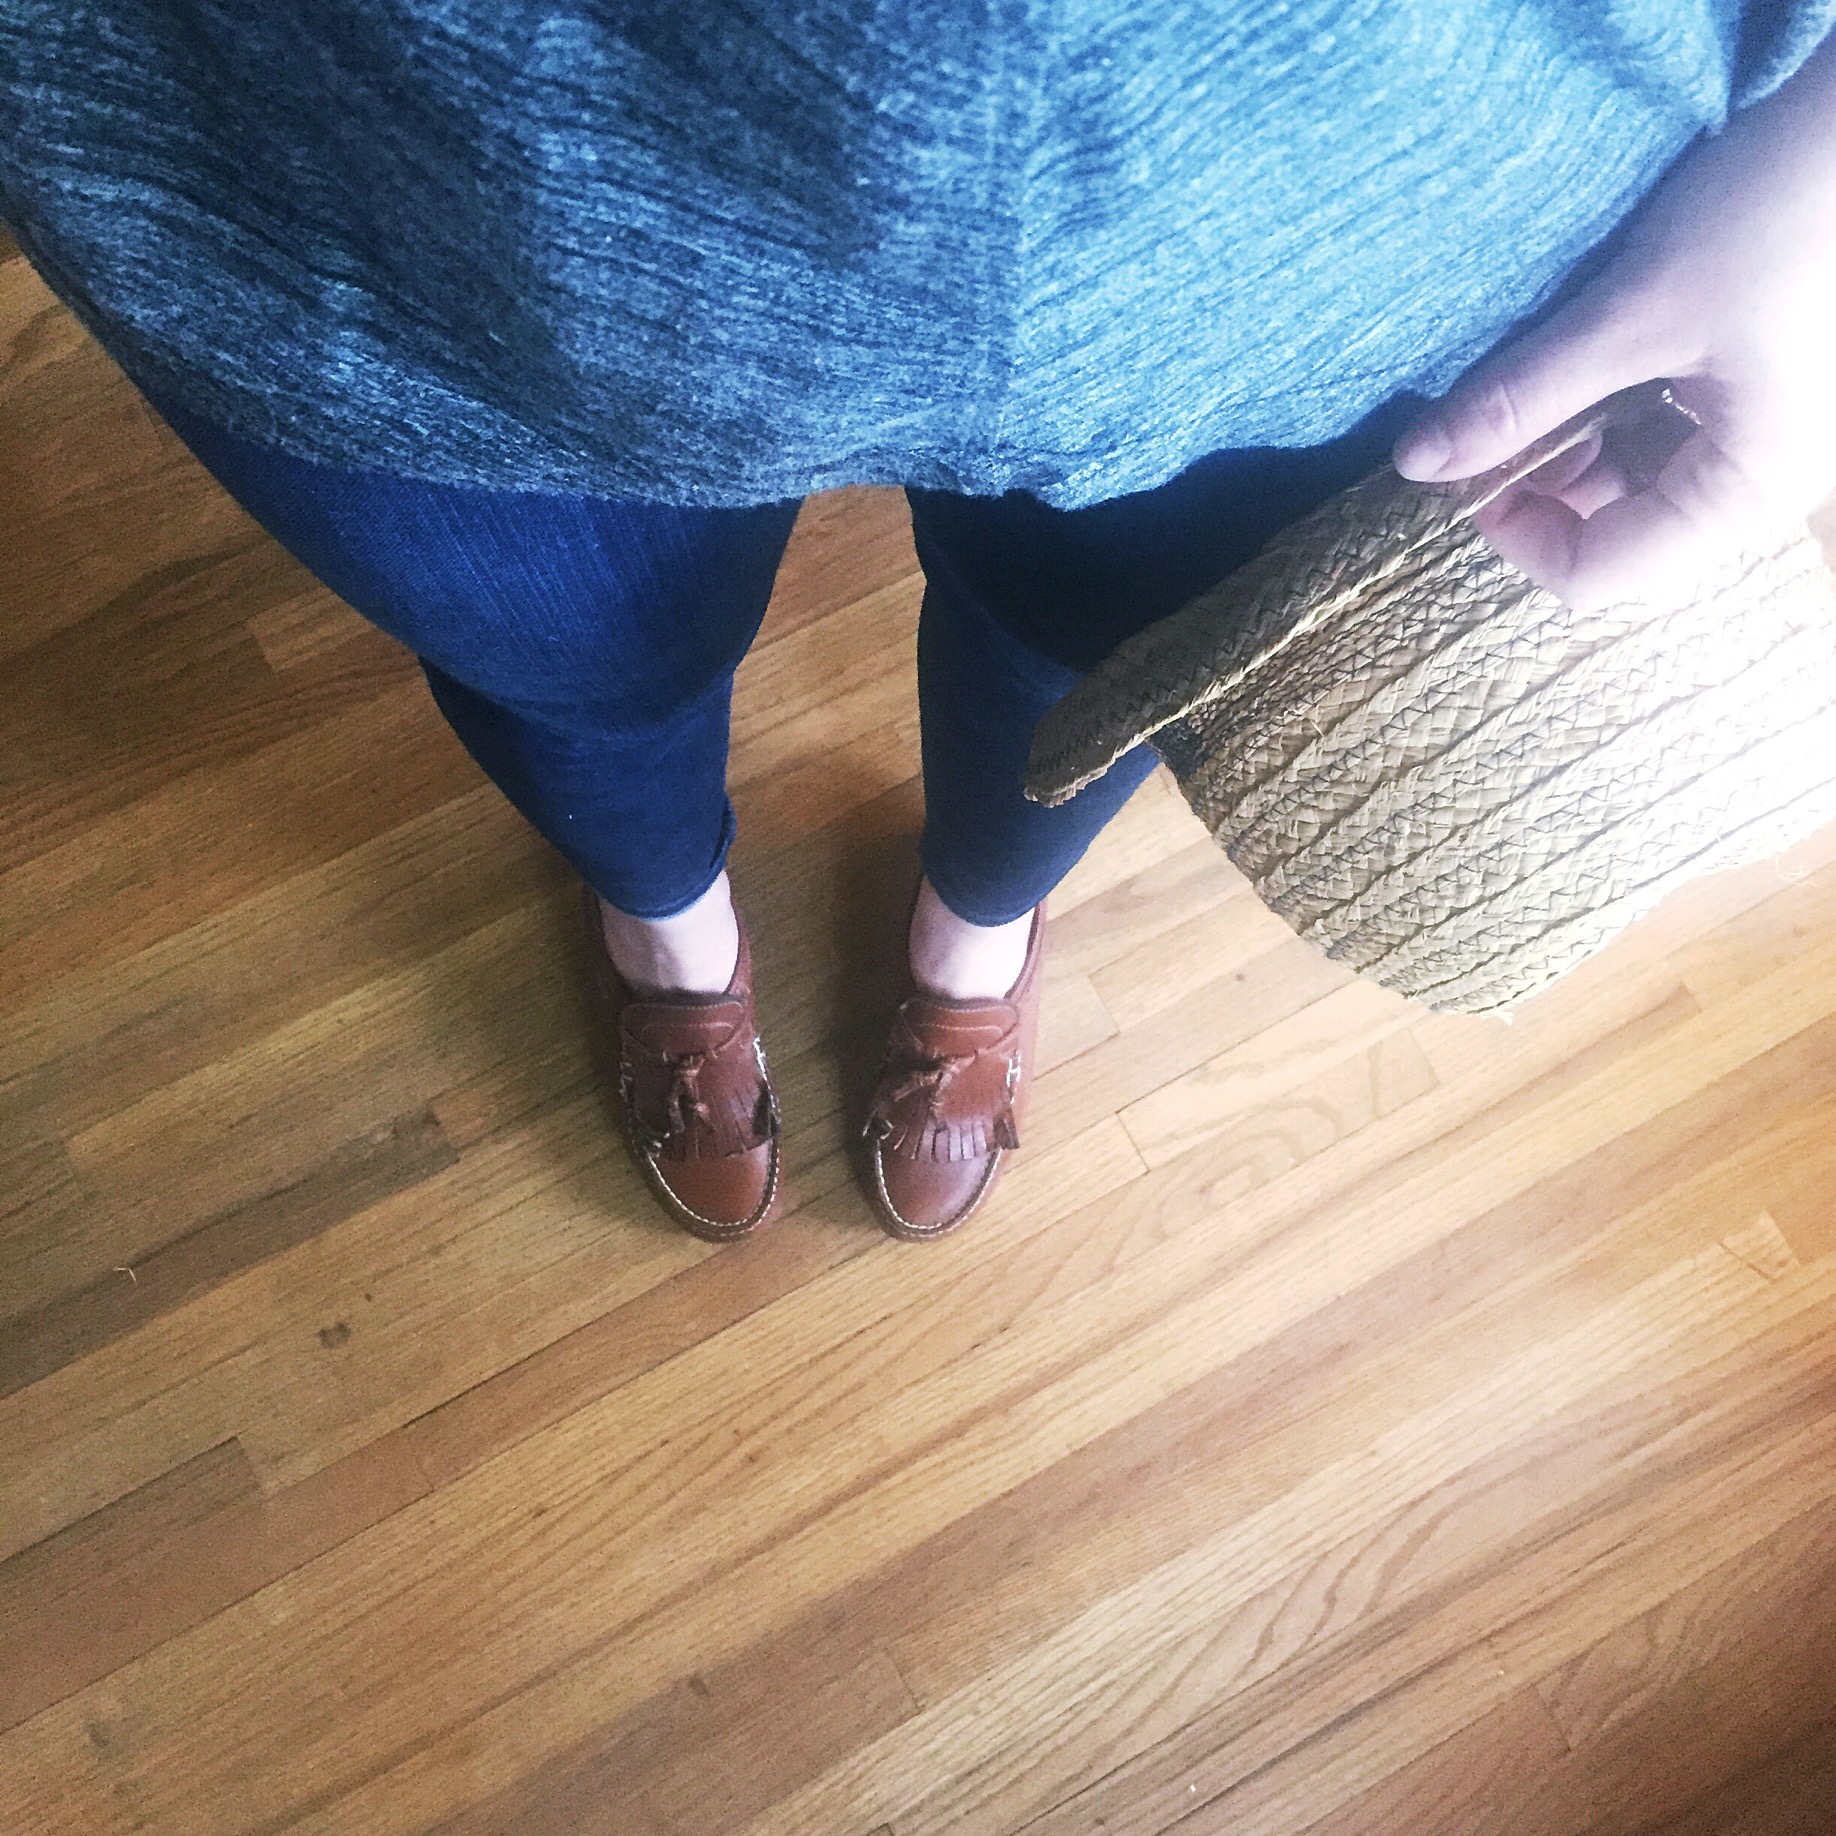 Karin Emily of truncationblog.com shares her weekly outfit roundup for 5/12/16